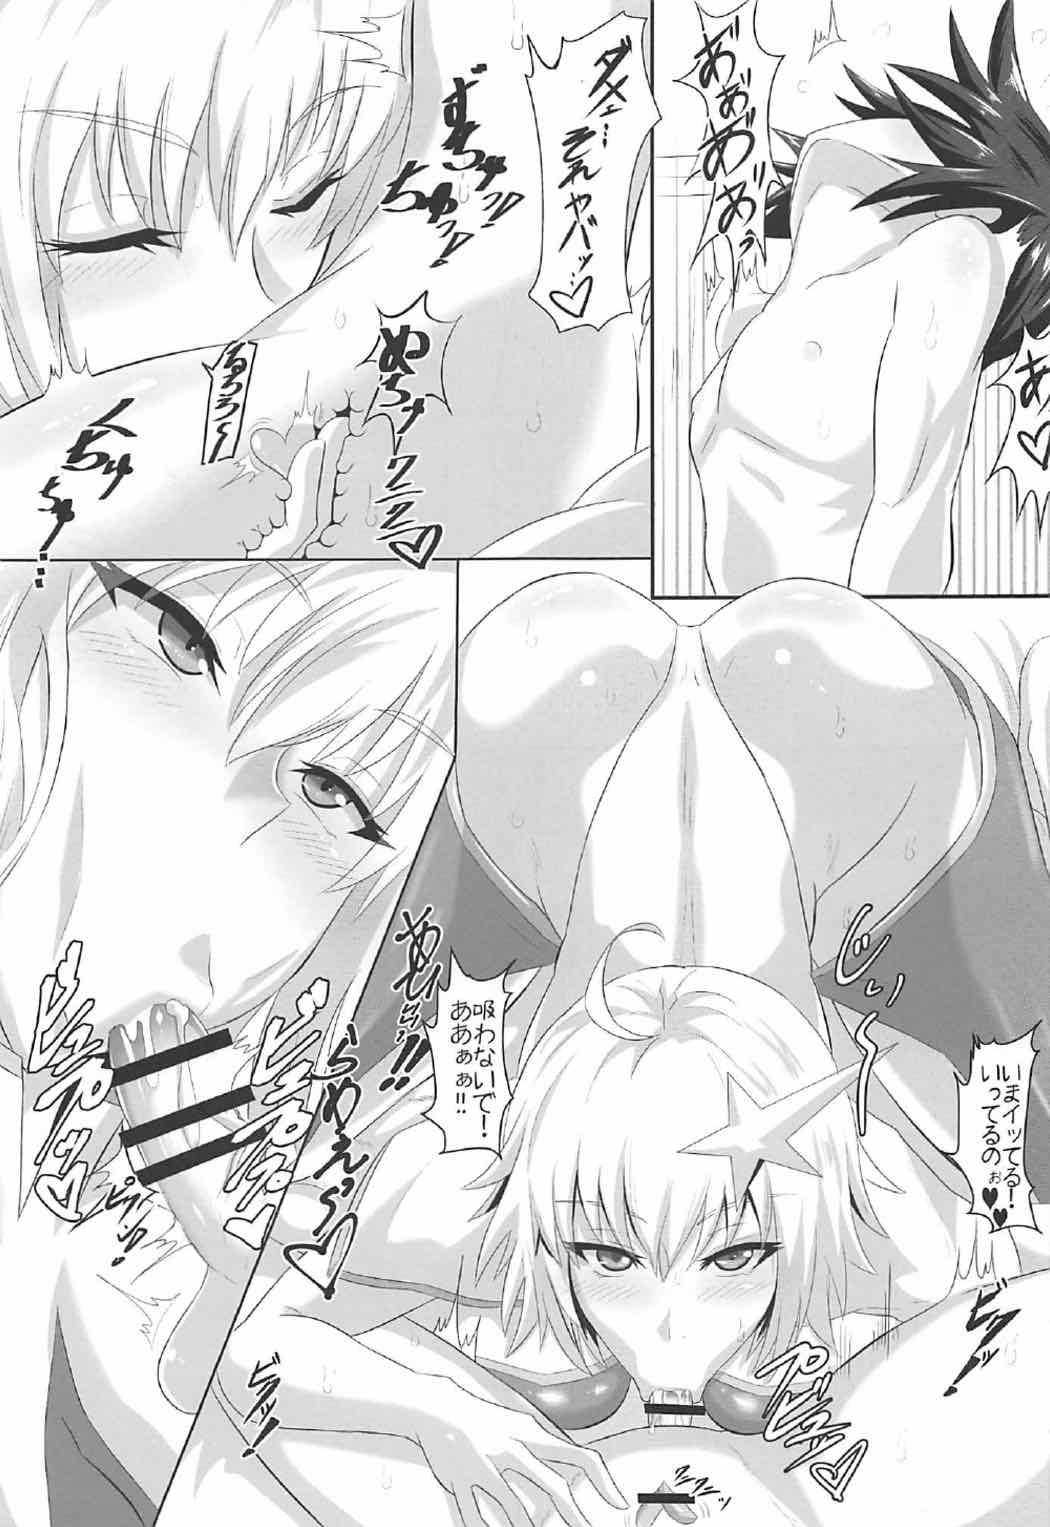 Chacal Gehenna 6 - Fate grand order Ninfeta - Page 8